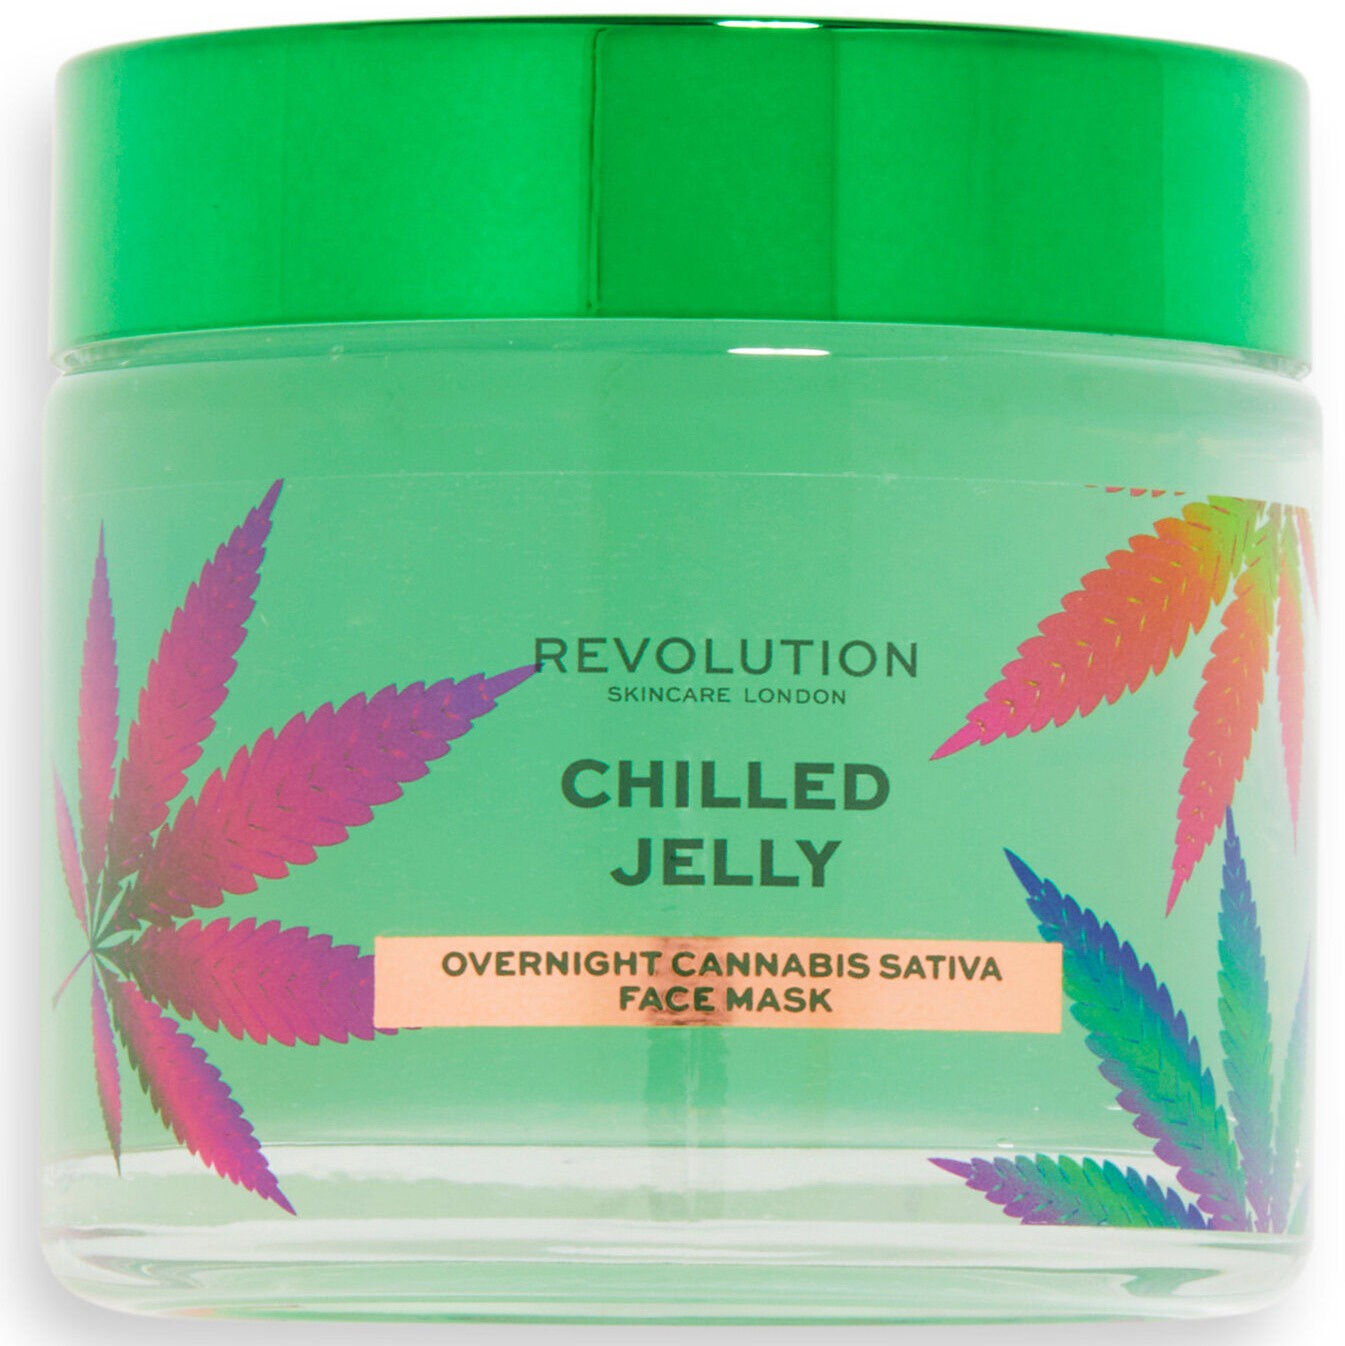 Revolution Skincare Chilled Jelly Overnight Cannabis Sativa Face Mask